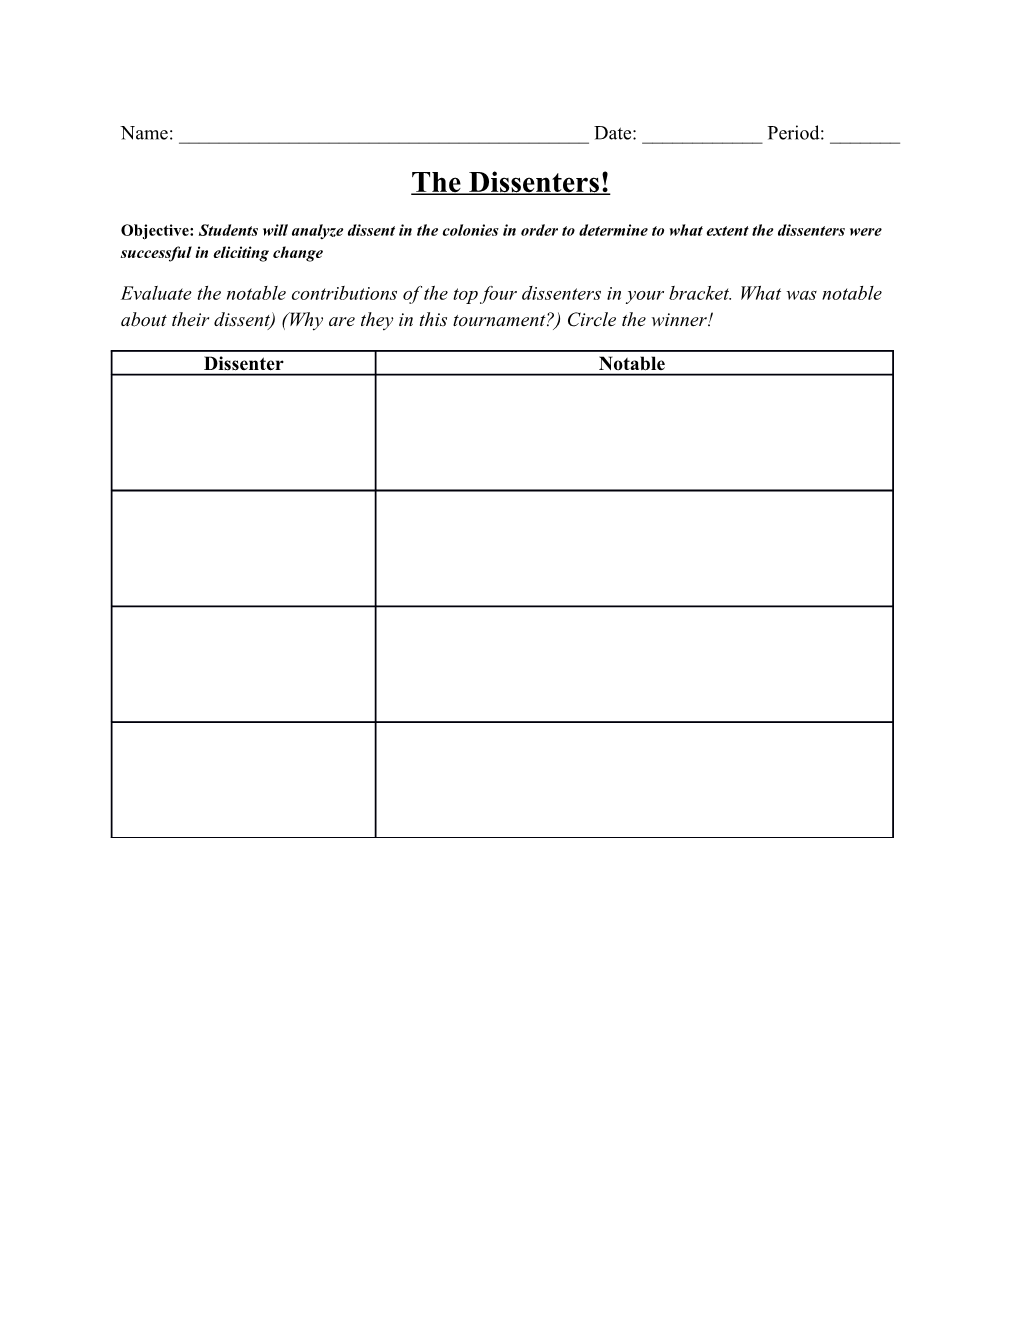 Objective:Students Will Analyze Dissent in the Colonies in Order to Determine to What